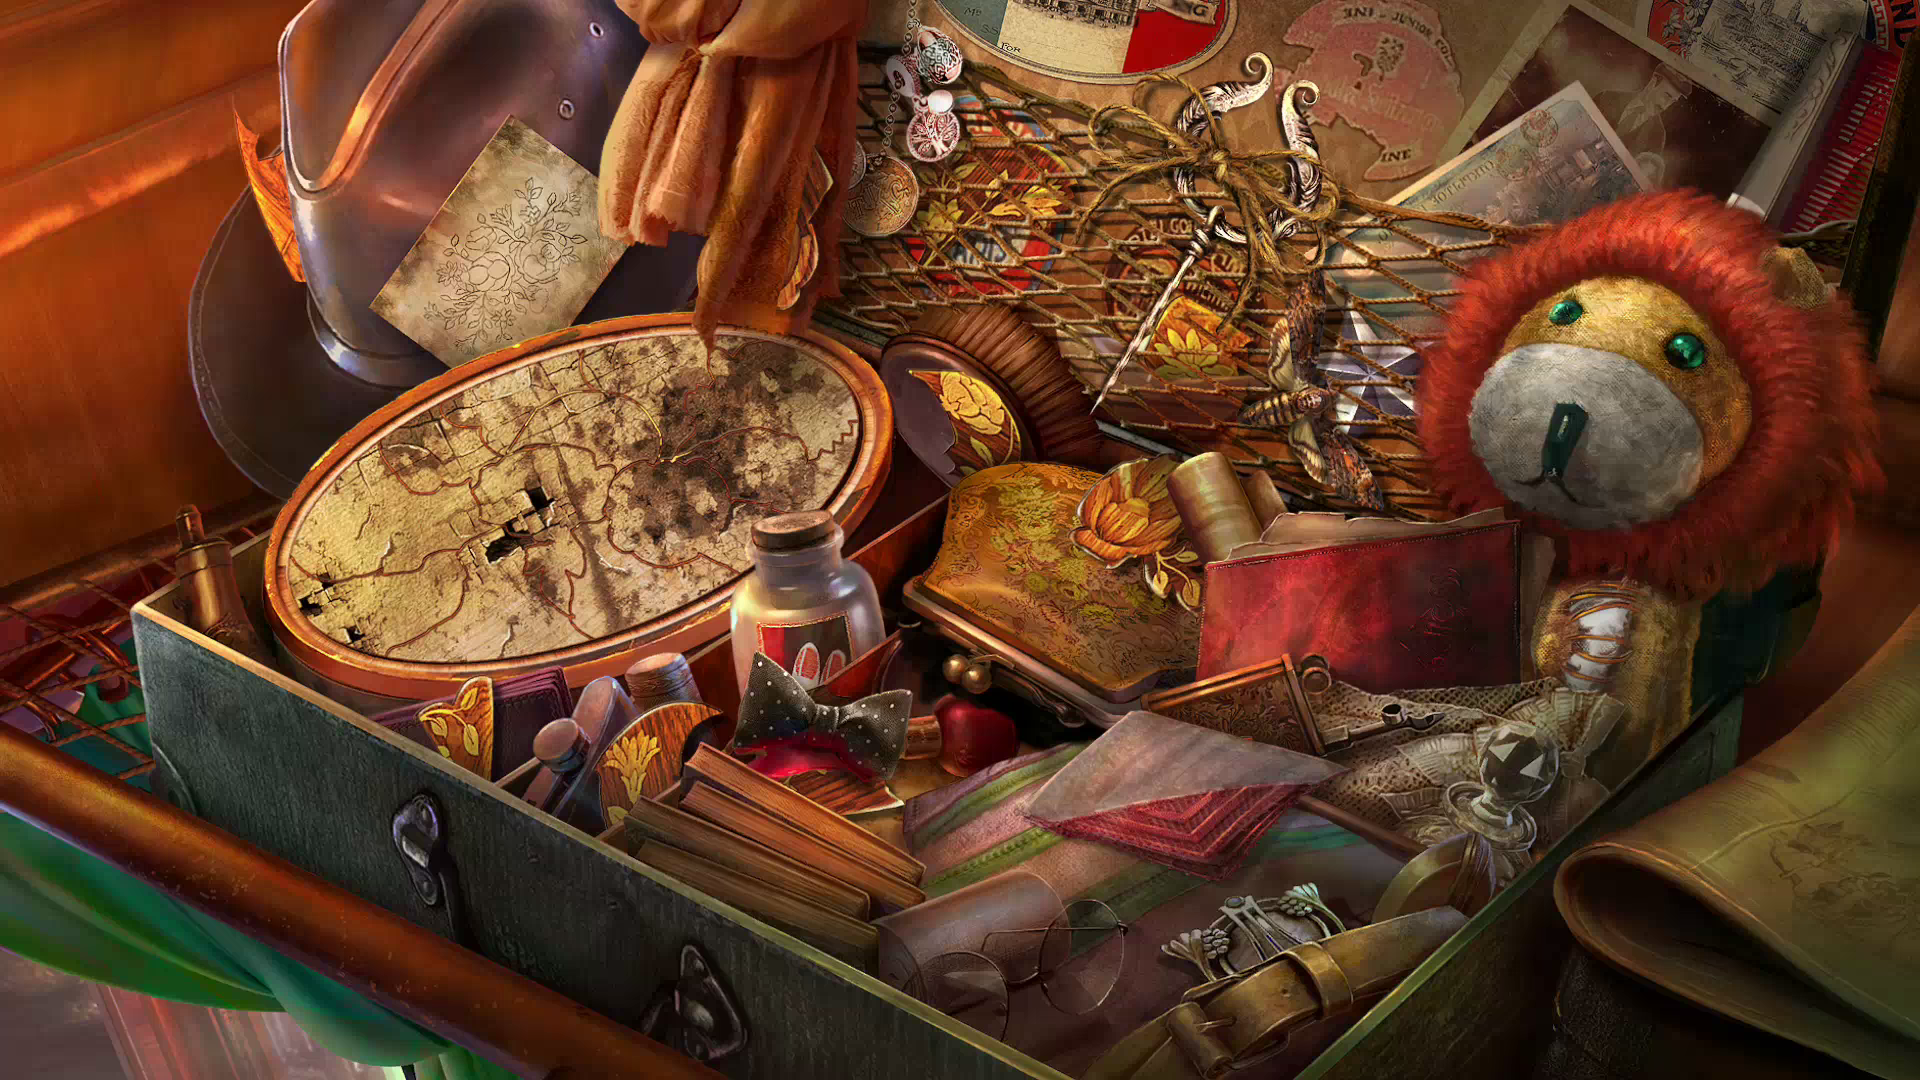 Endless Fables: Shadow within. Endless Fables 4: Shadow within. Сказки без конца 4: среди теней. Hidden object Puzzle Adventure. Сказки игра 2023